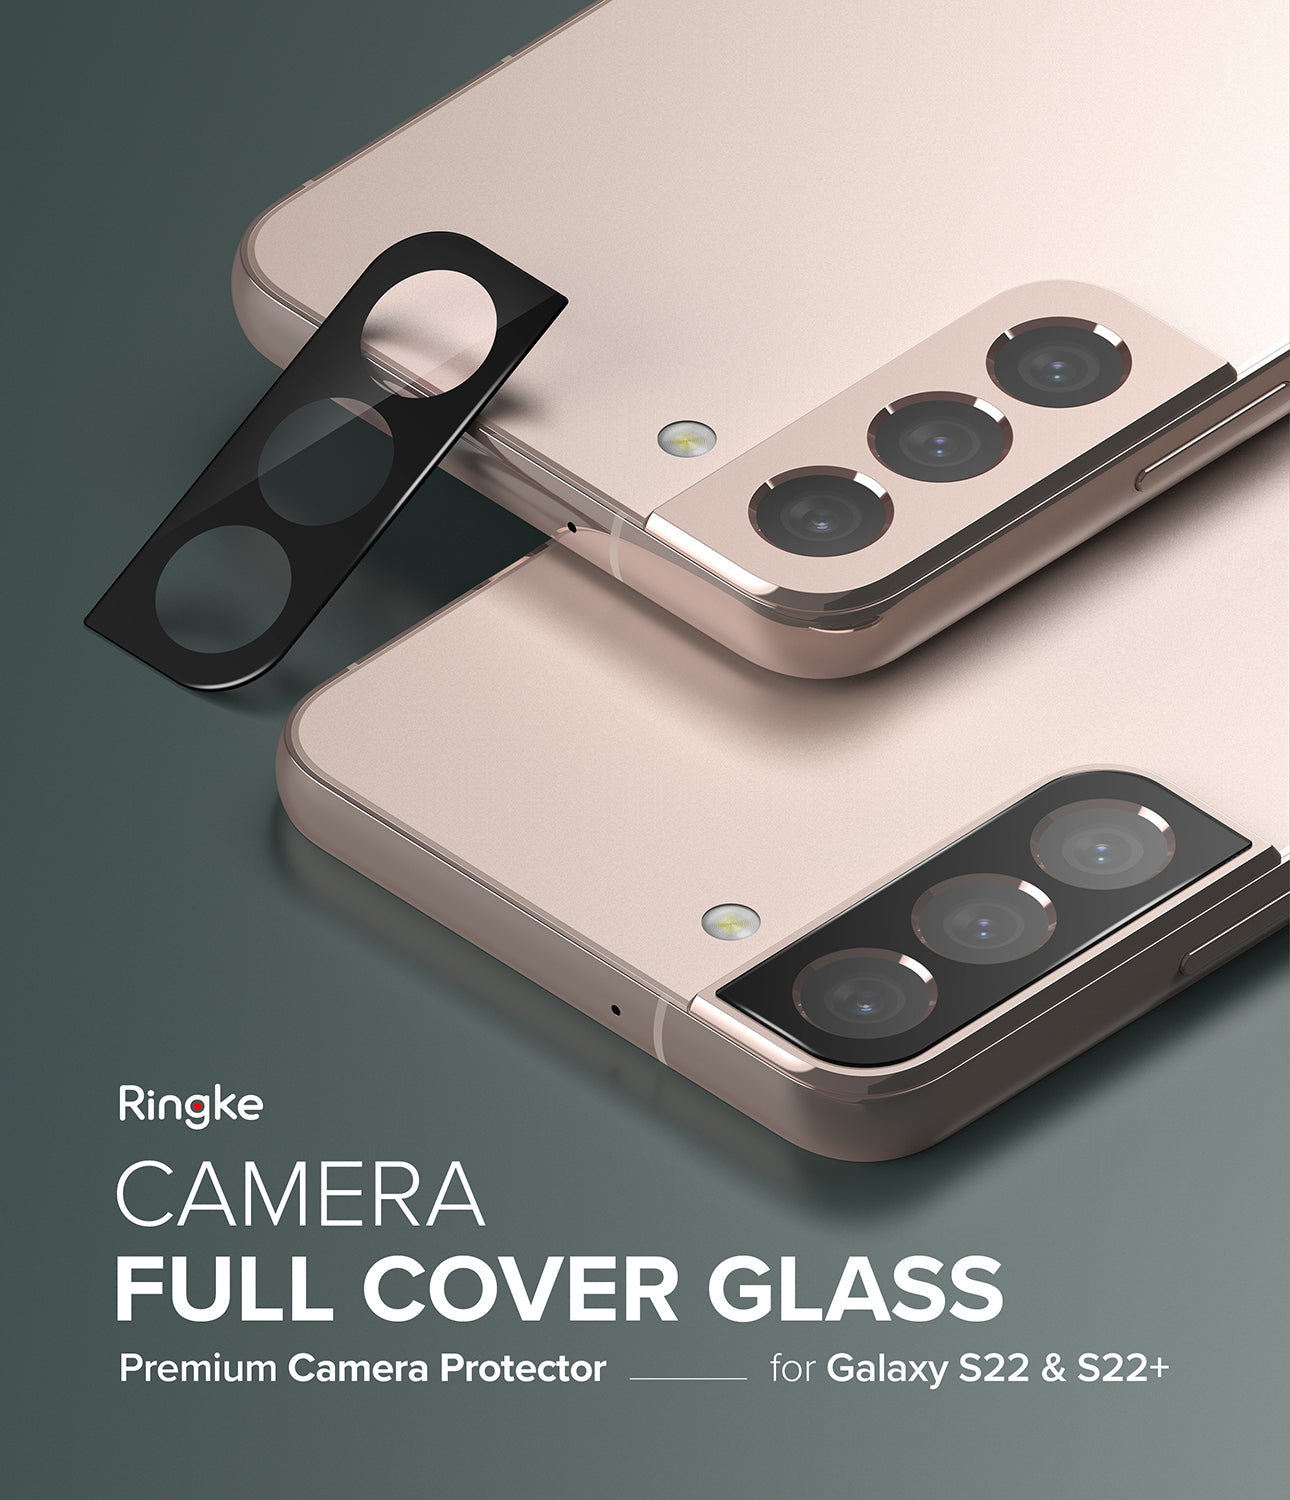 Galaxy S22 / S22 Plus Camera Protector Full Cover Glass [3 Pack]